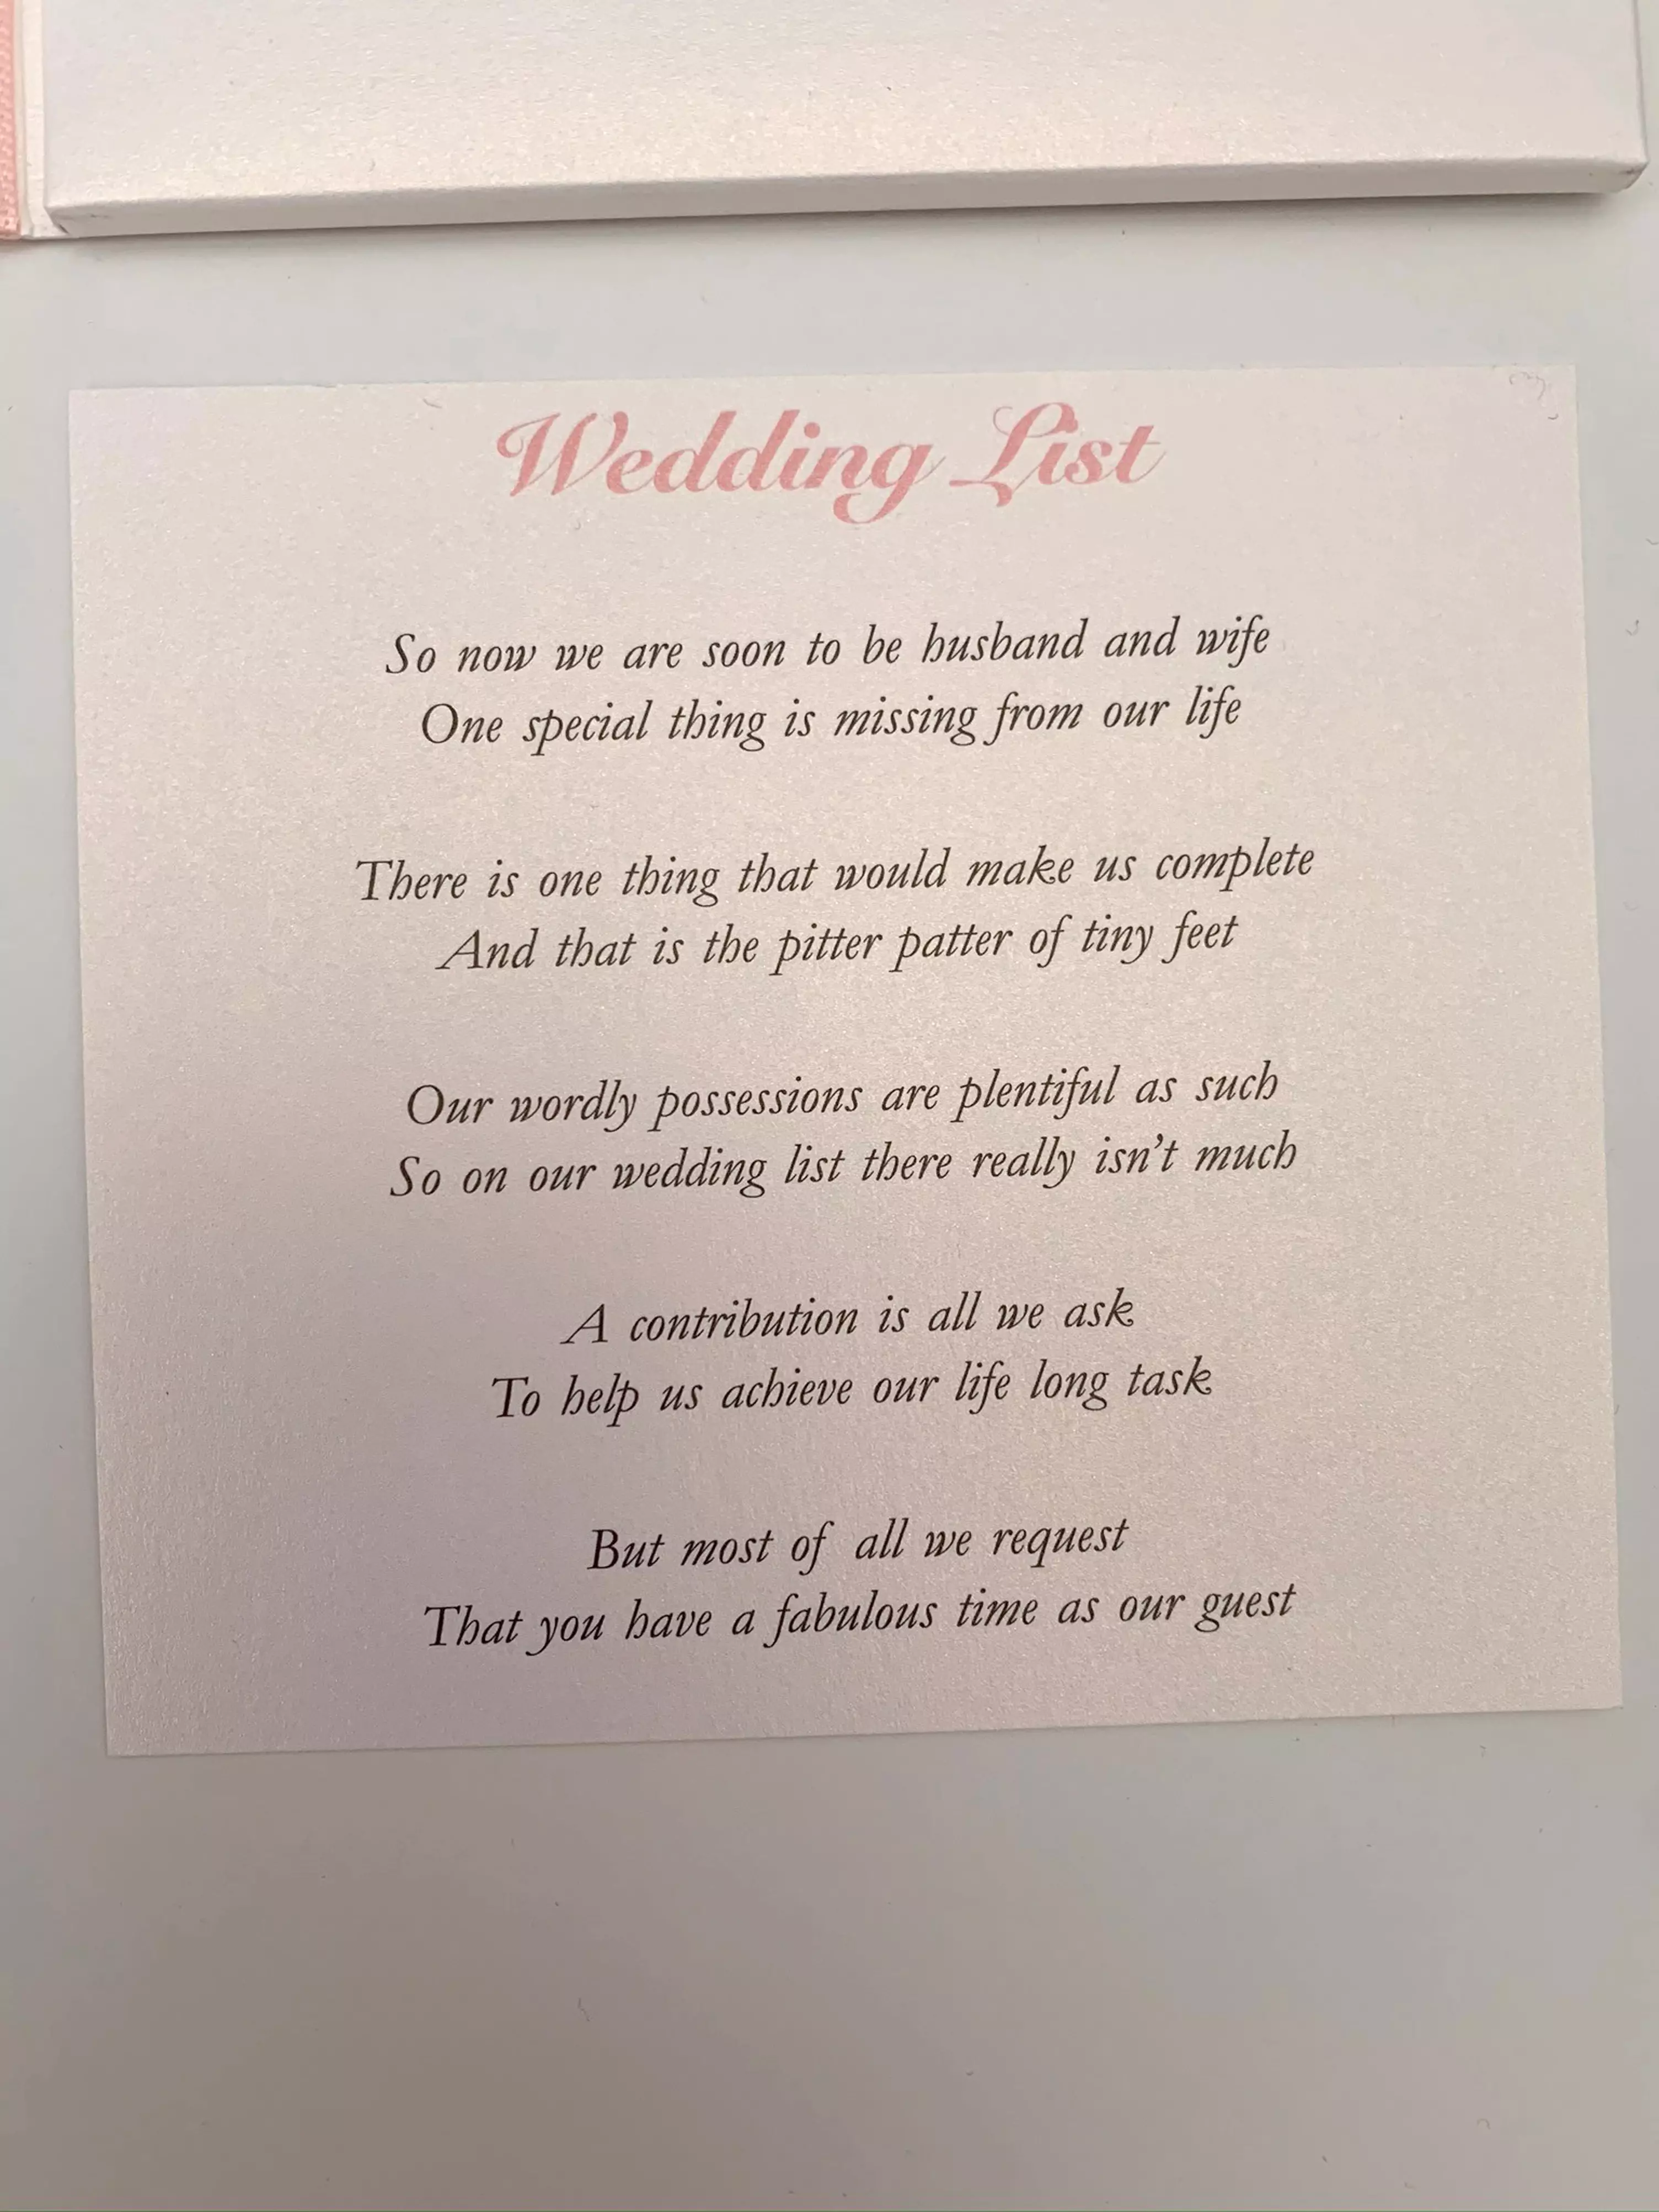 The couple asked for help using their wedding invitations (